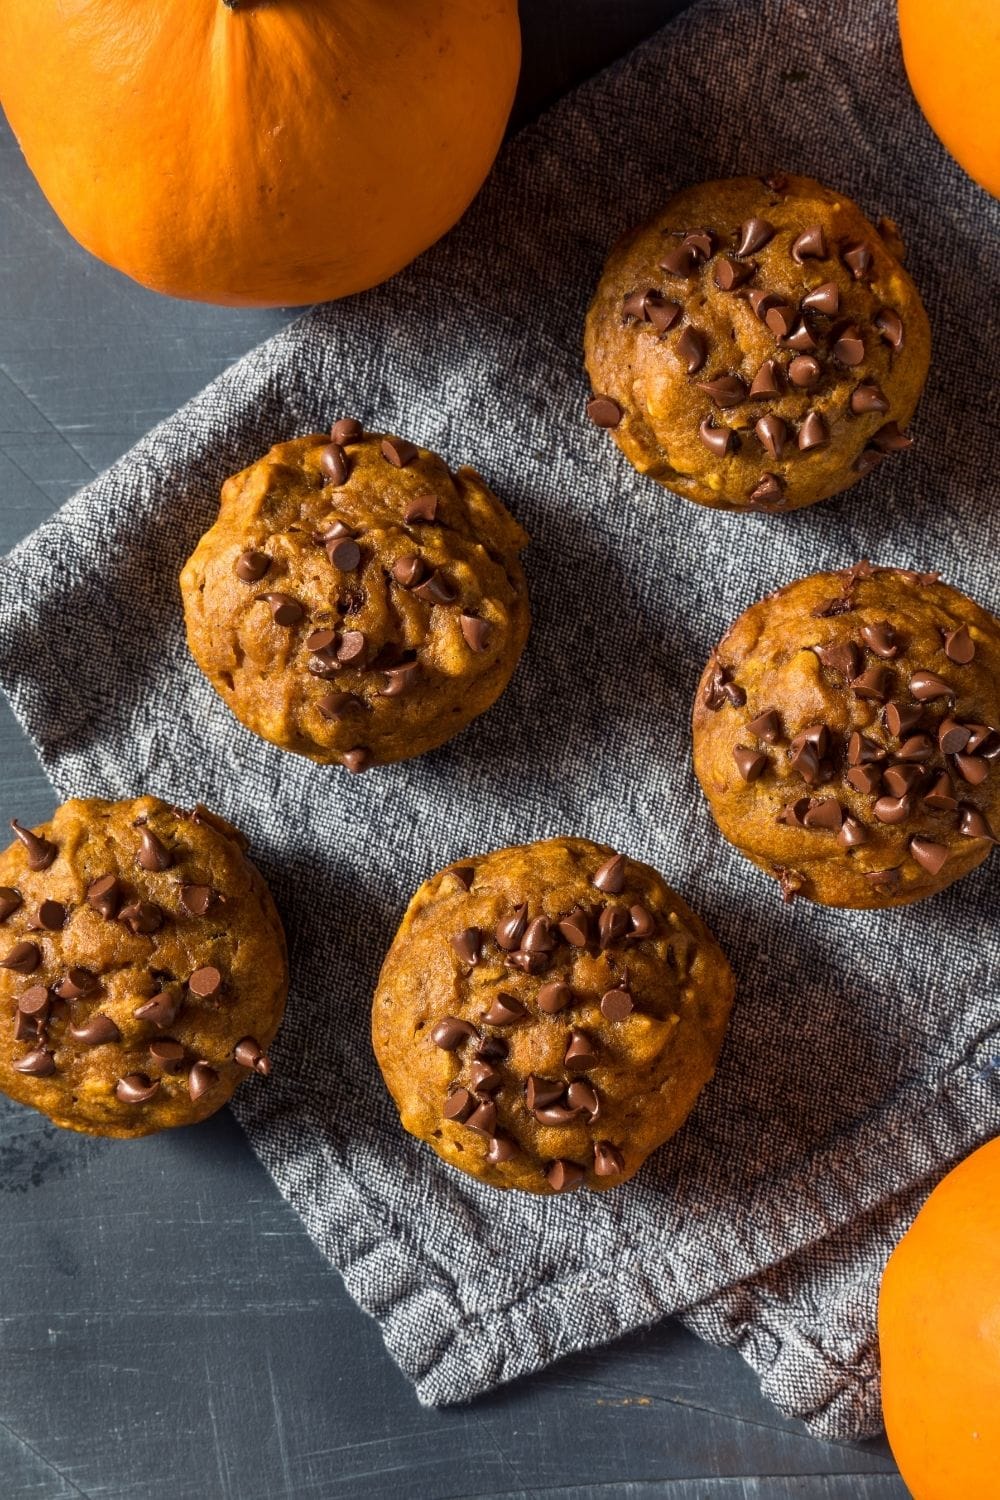 Easy two-ingredient pumpkin muffins with chocolate chips